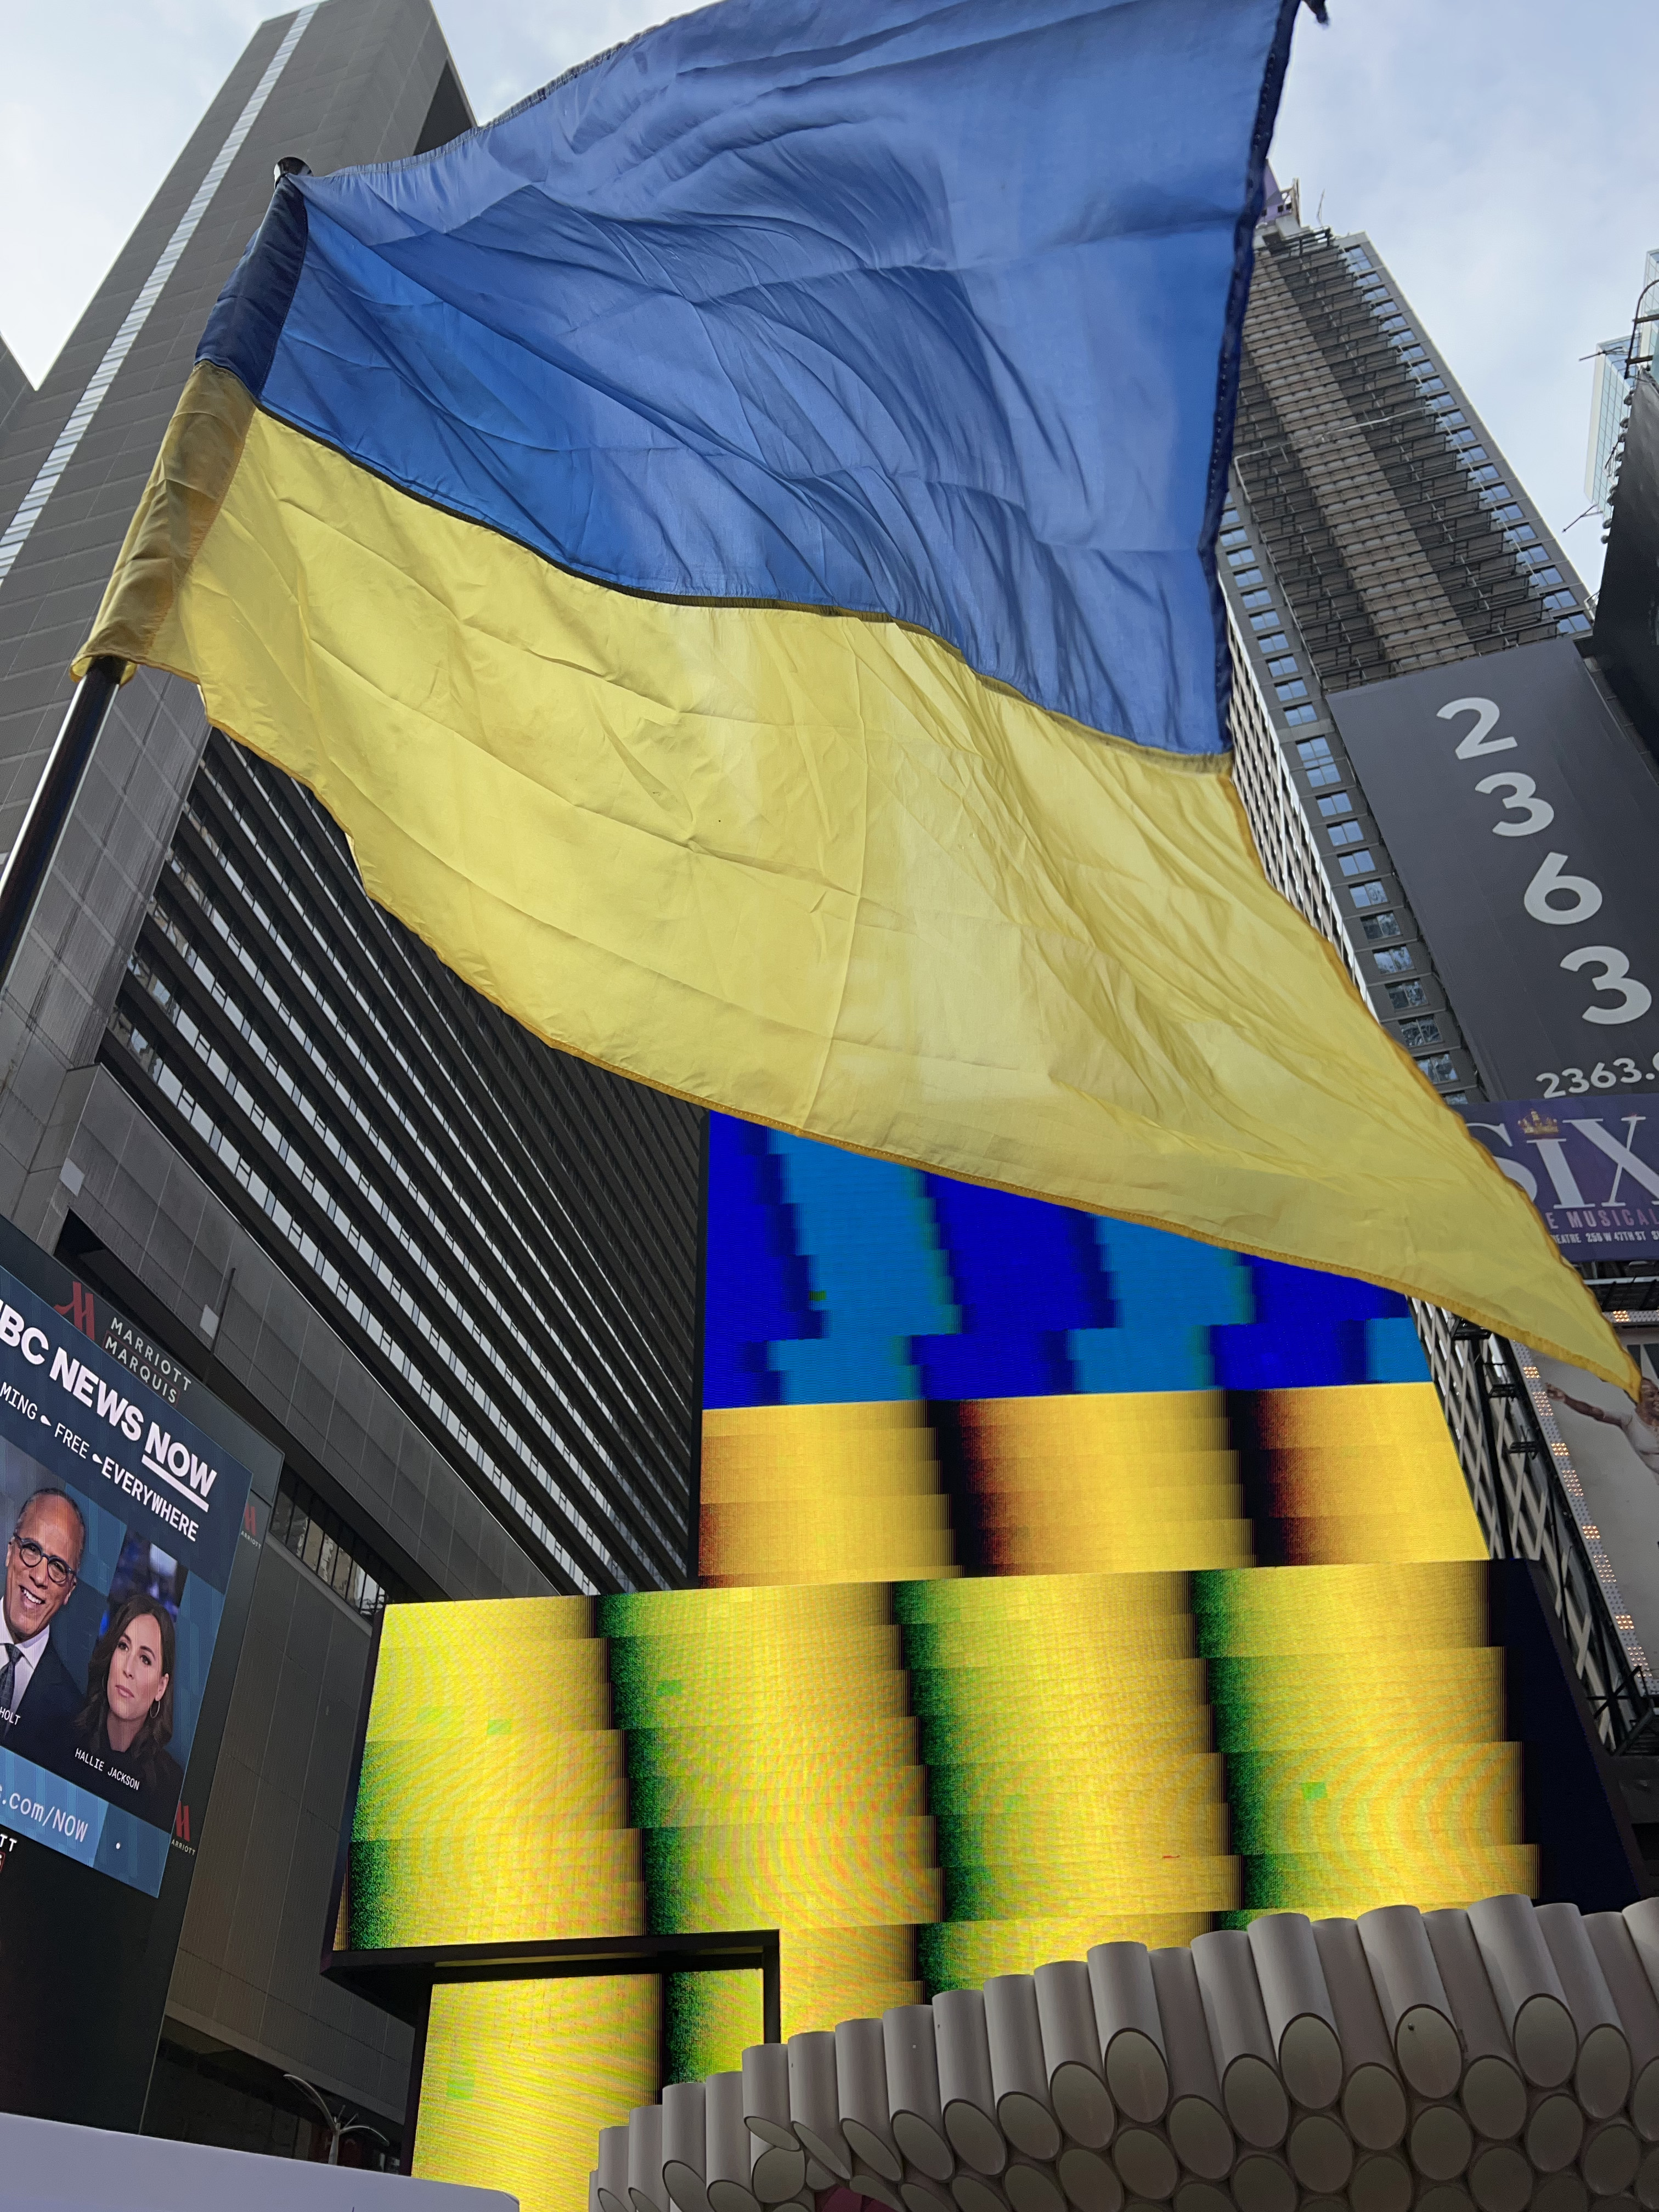 Rally in solidarity with Ukraine, Time Square, New York, March 5th, 2022. Photo by Emmanuel Guerisoli.